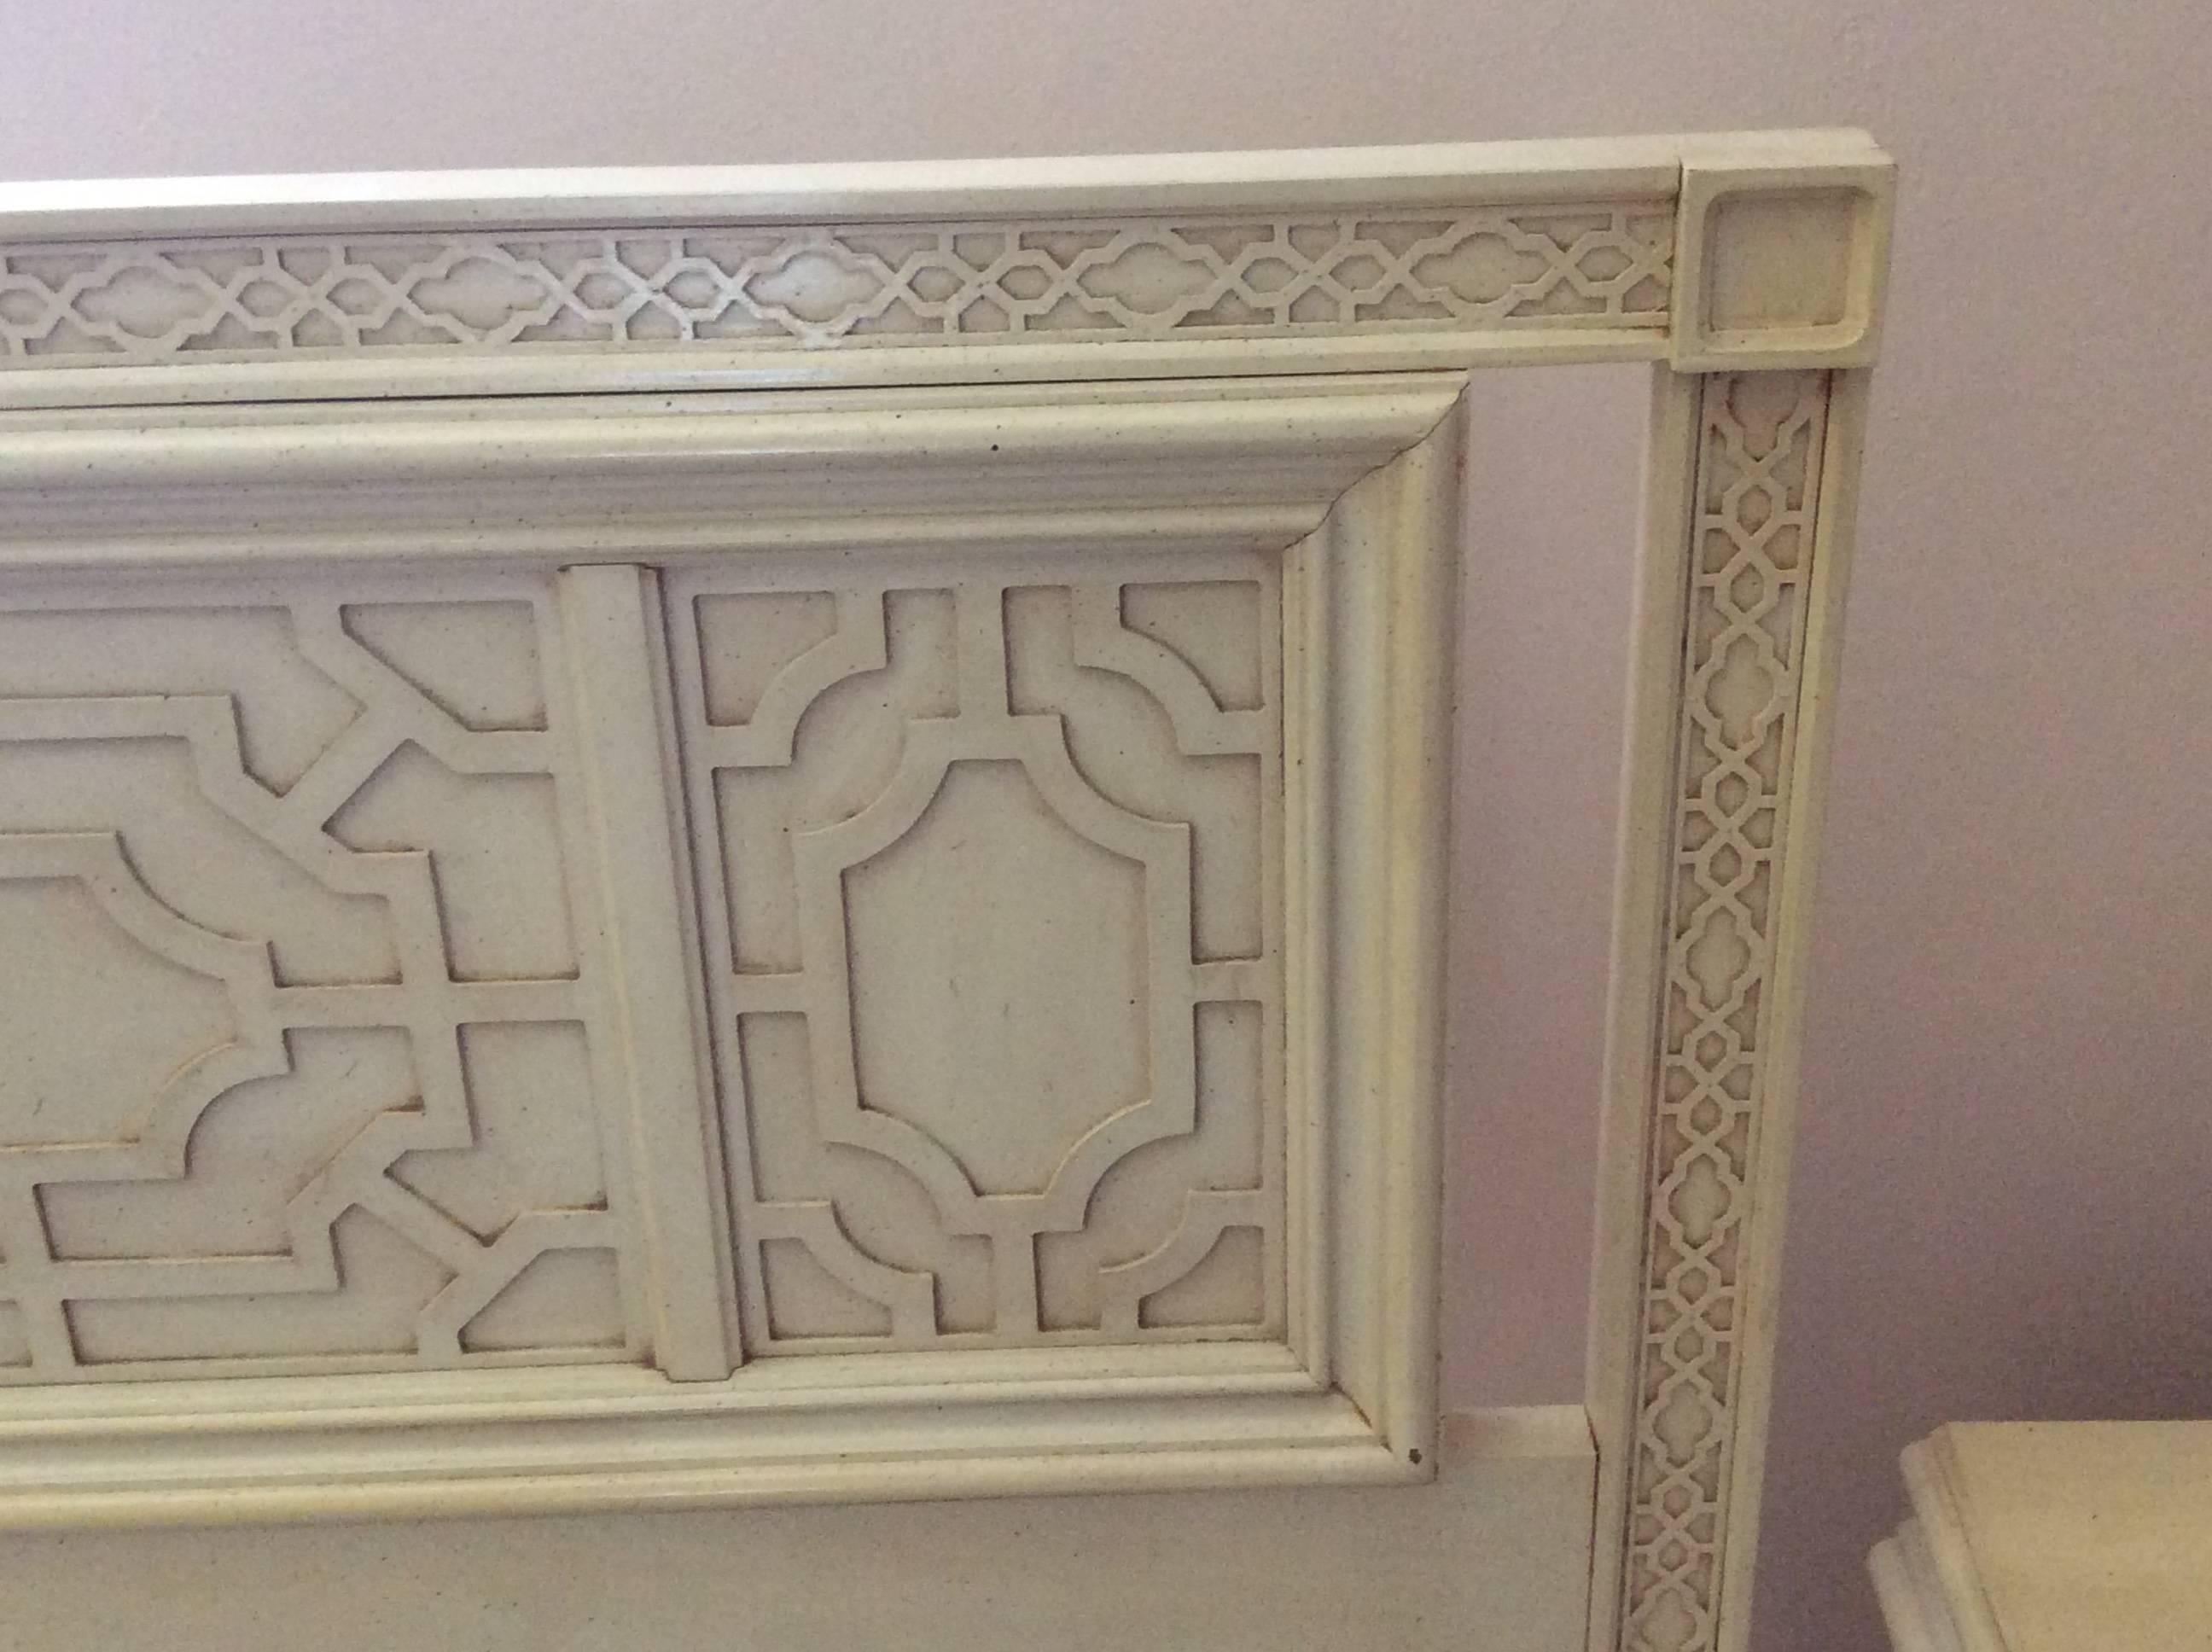 Amazing vintage Hollywood Palm Beach Regency,  Thomasville king-size fretwork Fret work headboard bed. This would look absolutely incredible with a fresh coat of lacquer! Email me if you would like a quote for lacquering on this piece. Original